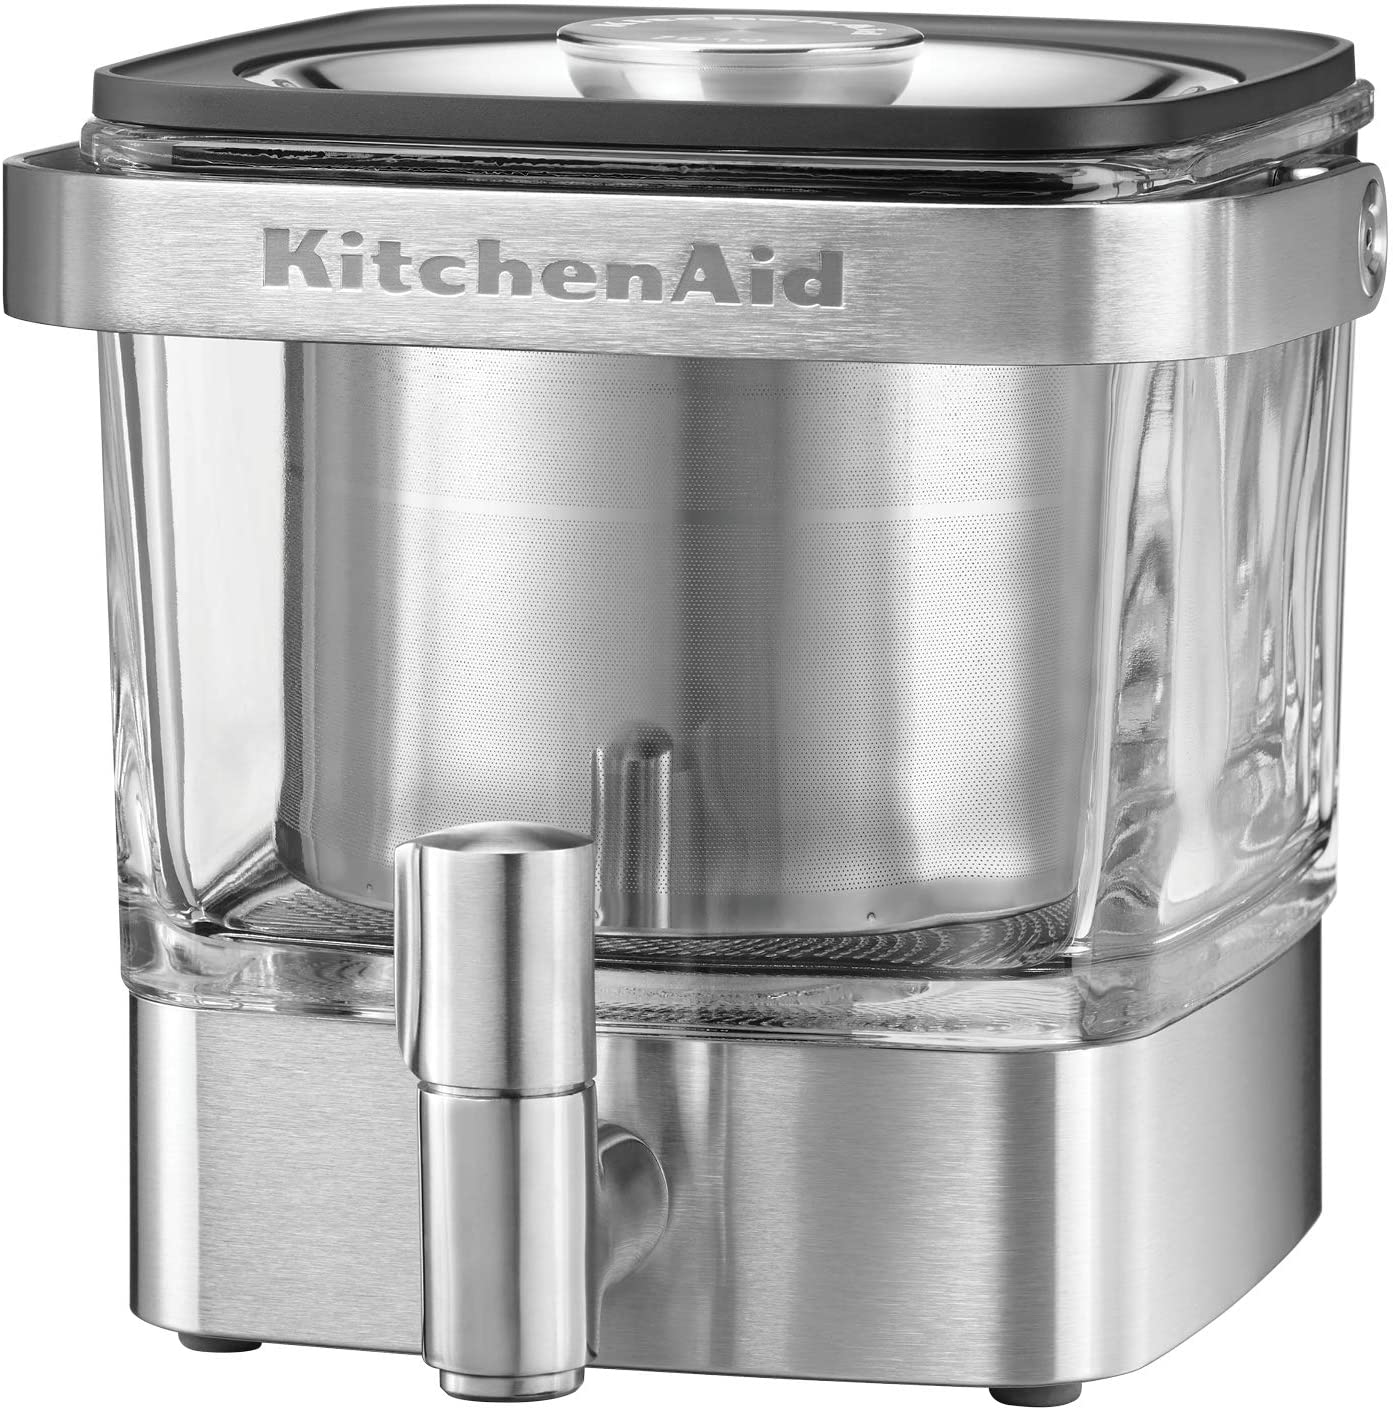 KitchenAid KitchenAid Brushed Stainless Steel Coffee Maker for Cold Brew Coffee 28 Ounce Brushed Stainless Steel